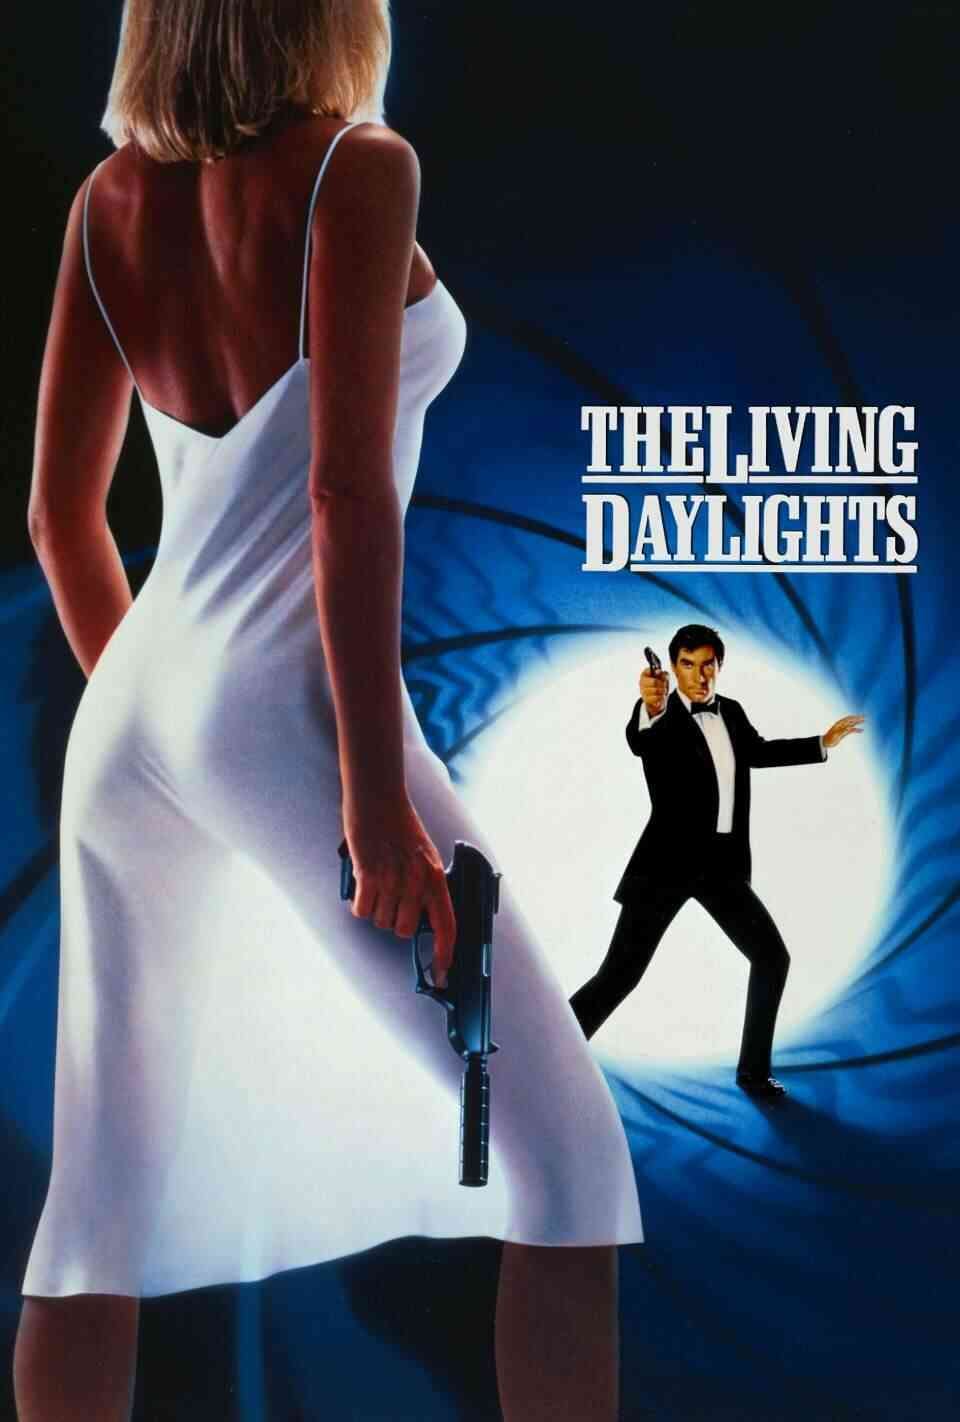 Read The Living Daylights screenplay.